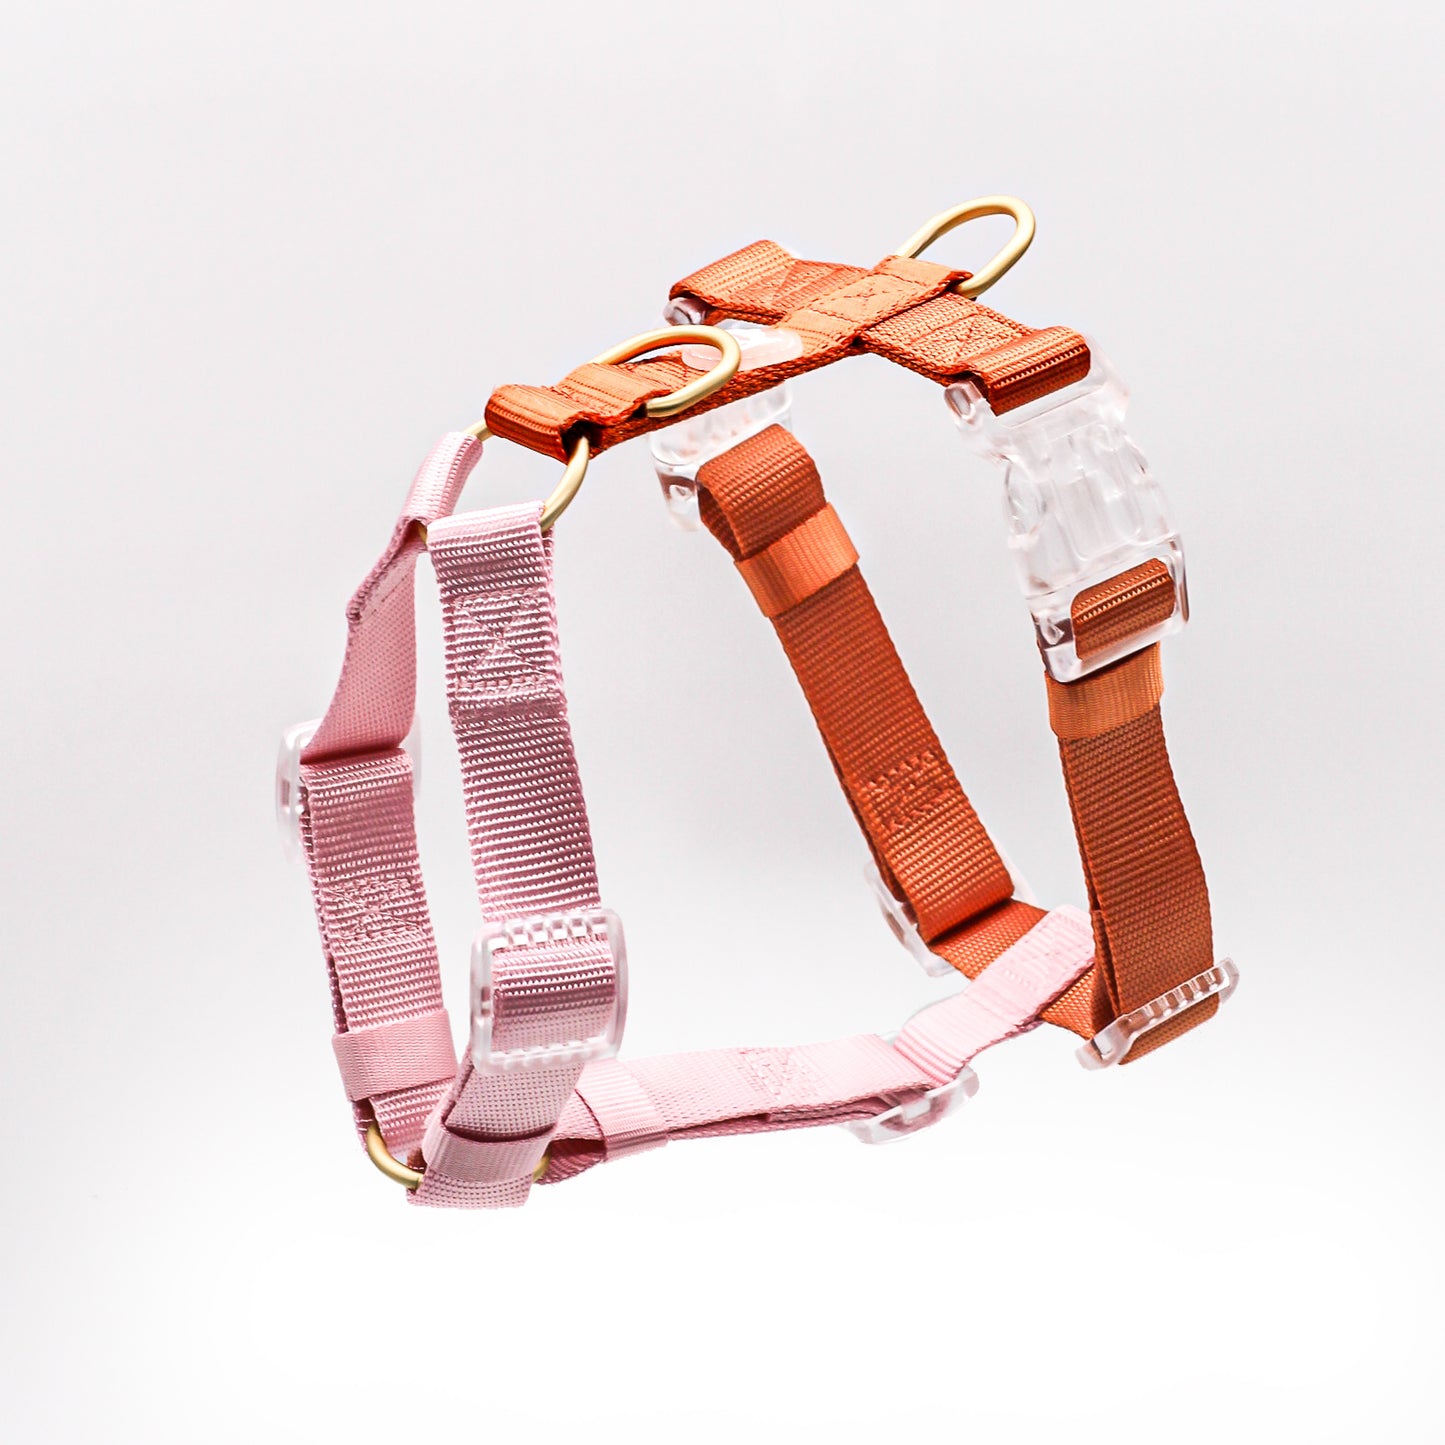 2 Color Contrast Dual Dusty Pink Orange Classic Dog Nylon Strap Harness with Gold Hardware Clear Buckles Pet Accessory Bop Pop Pets Details Logo tag Cloudberry